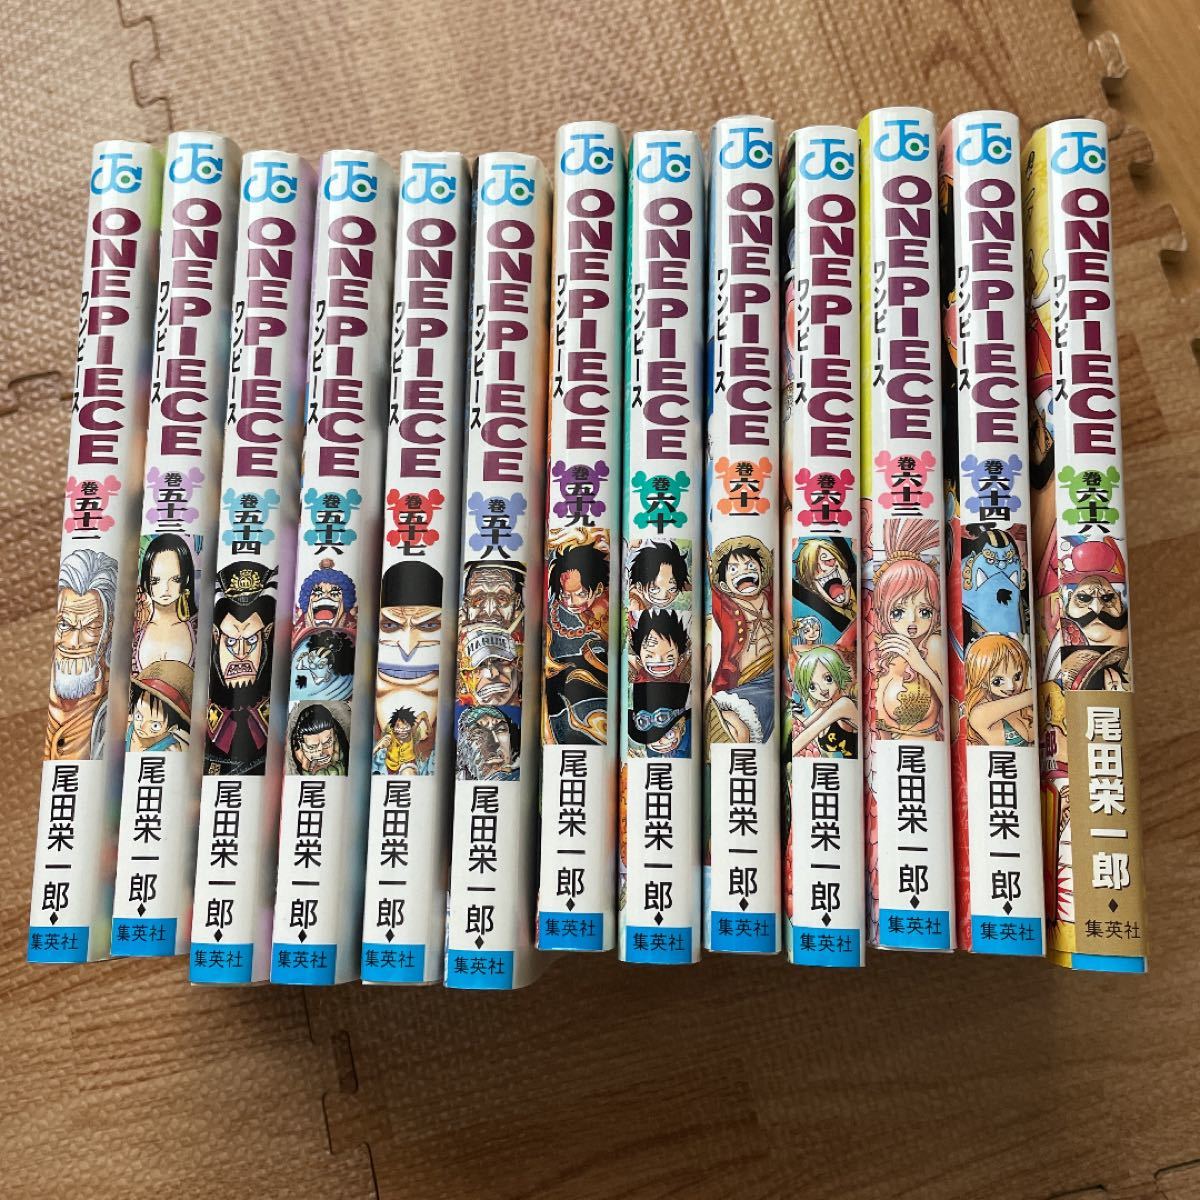 ONE PIECE 漫画　51〜54巻 56〜64巻 66巻 コミック漫画